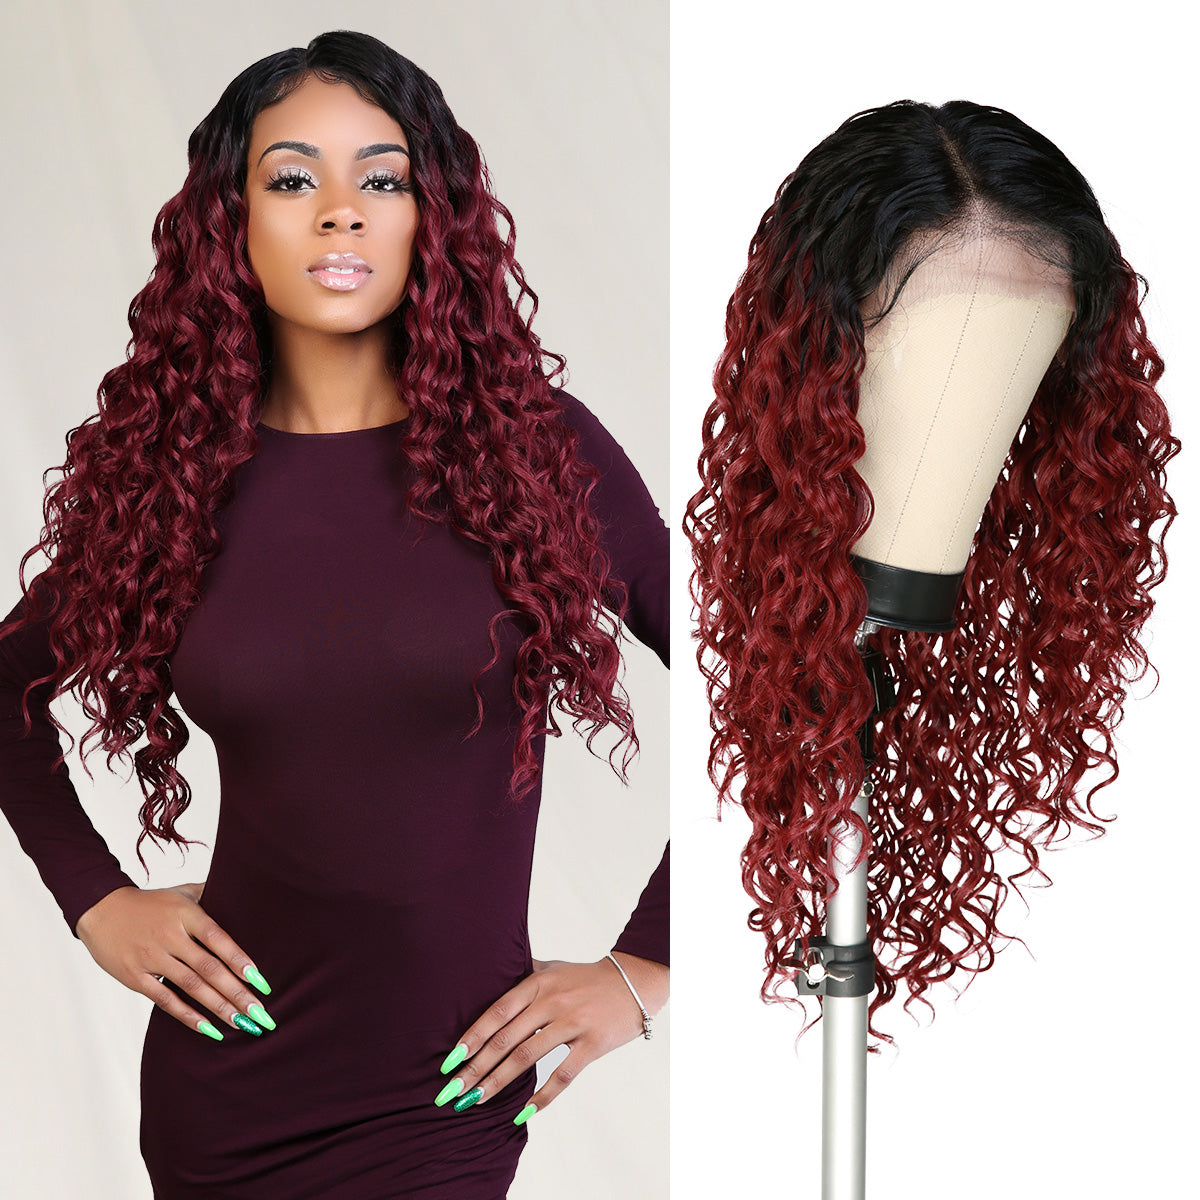 The Stylist Human Hair Blend Pre Plucked 13x6 Invisible HD Lace Frontal Wig Selena